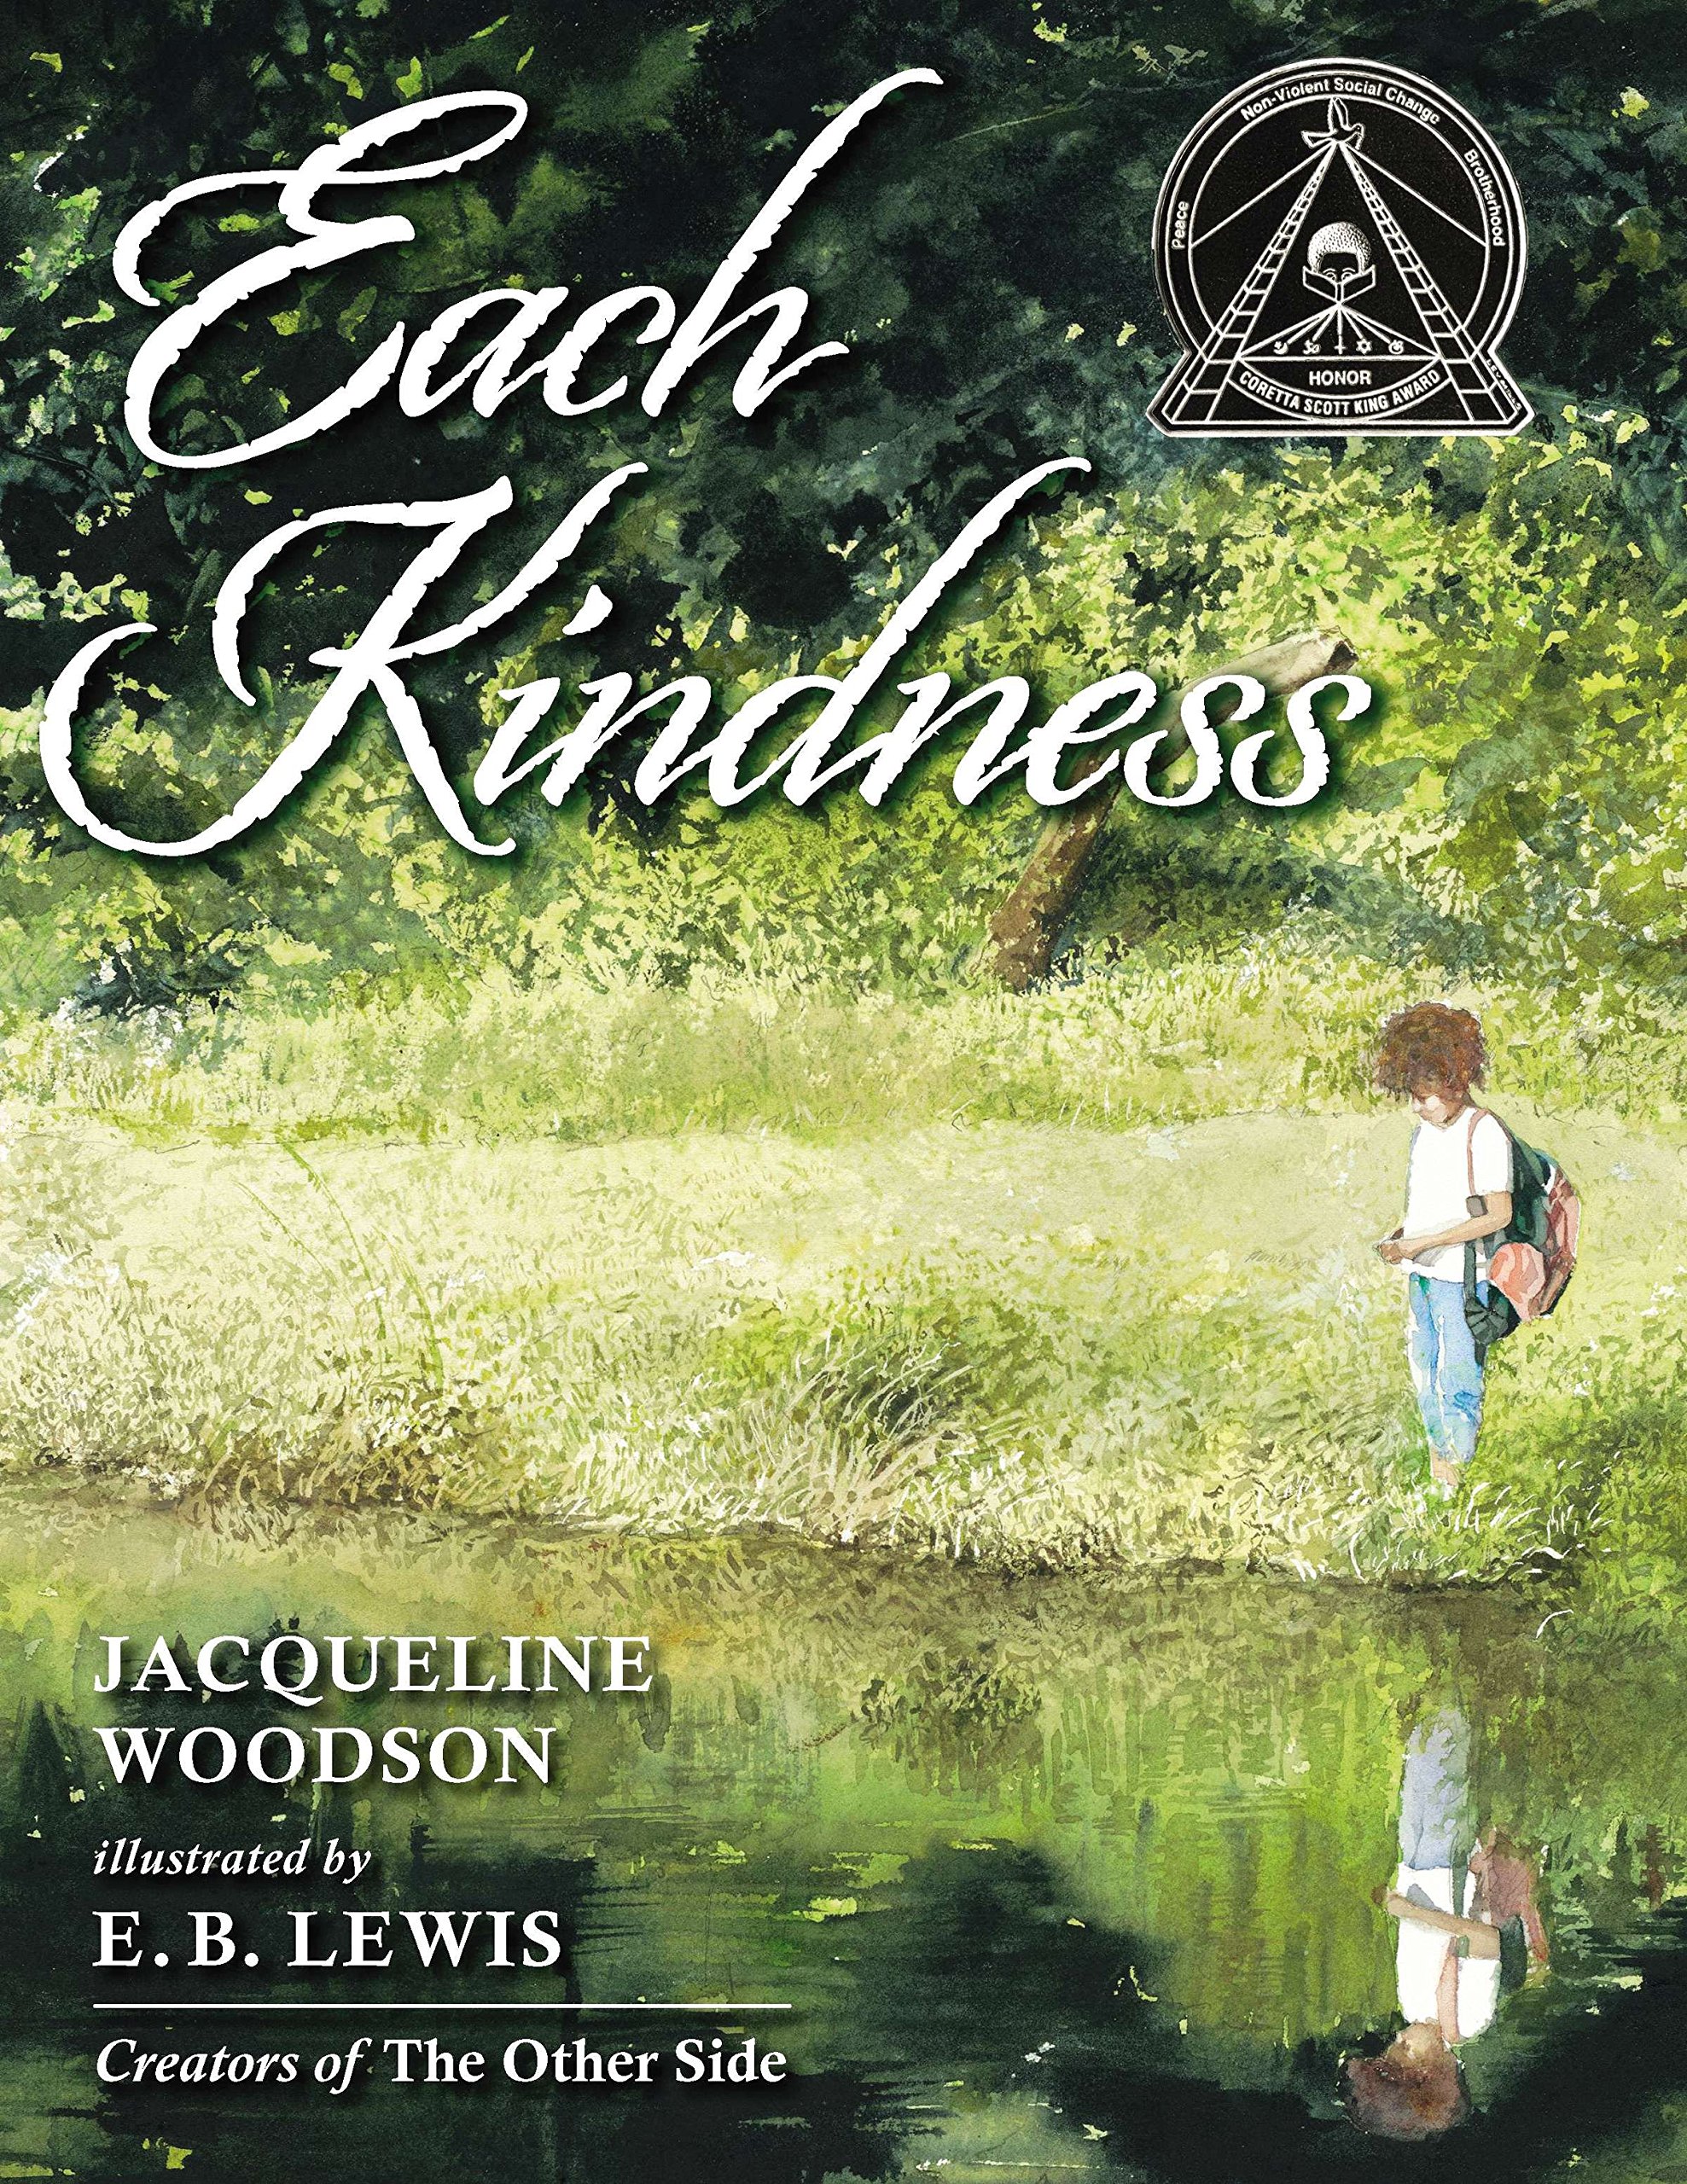 The cover for the book Each Kindness